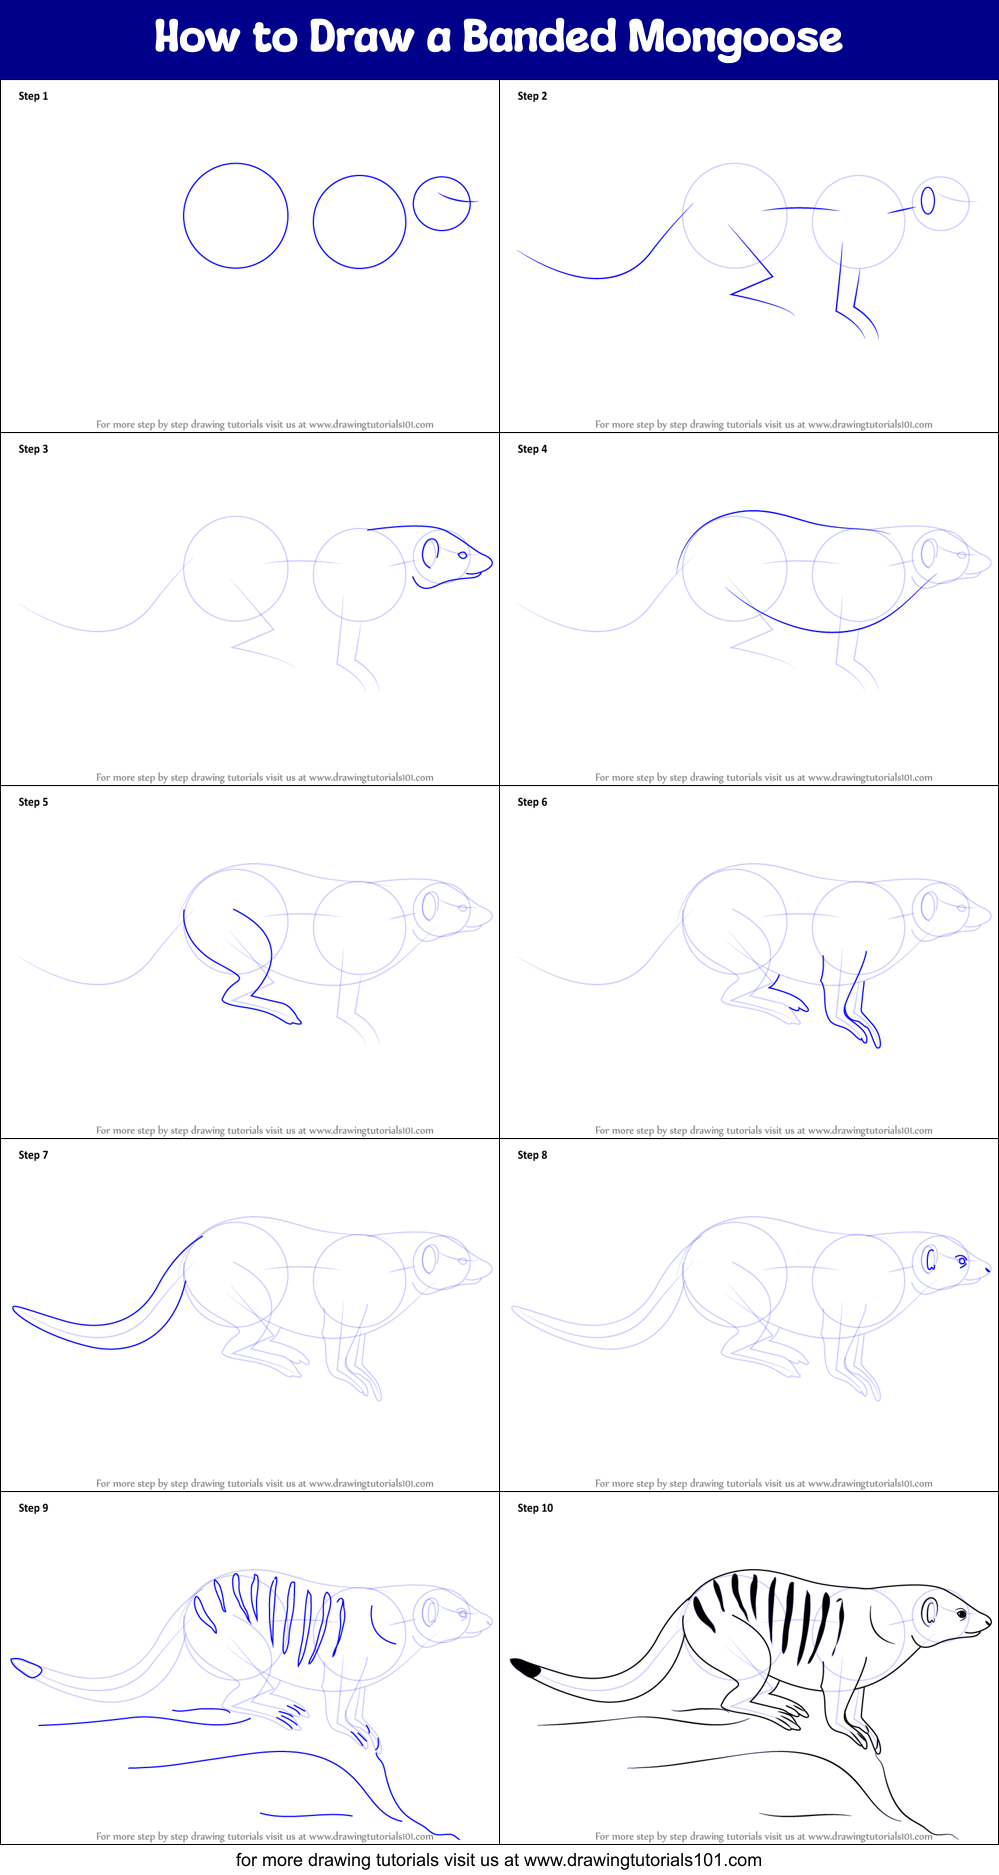 How to Draw a Banded Mongoose printable step by step drawing sheet